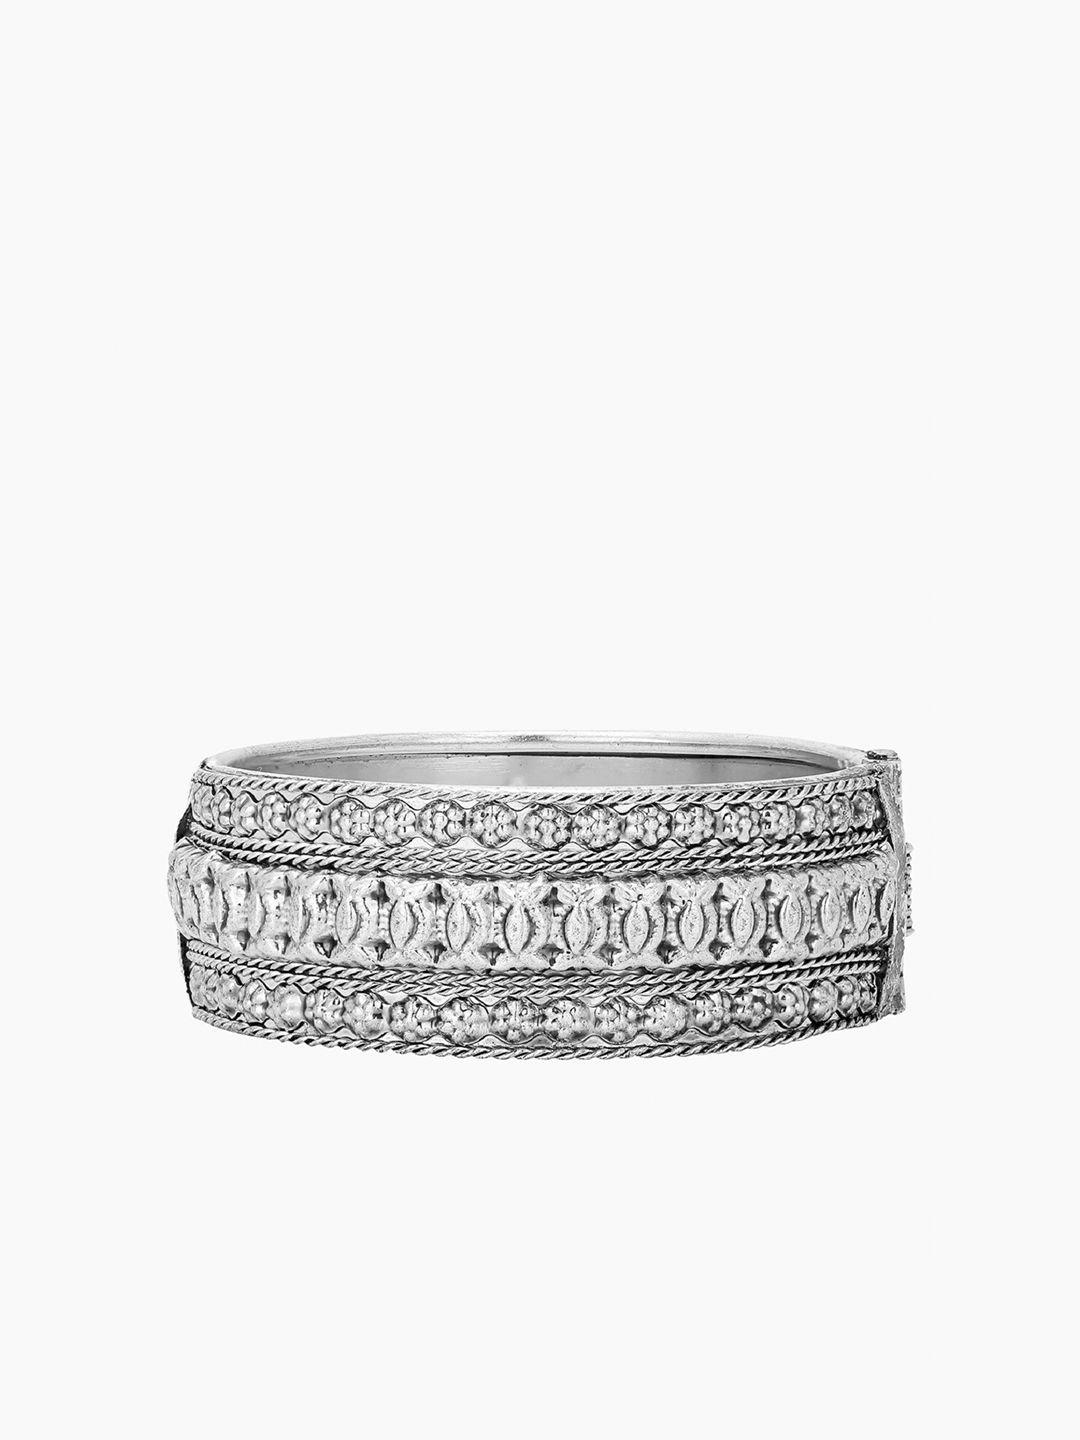 Adwitiya Collection Silver-Plated Oxidised Cuff Bracelet Price in India